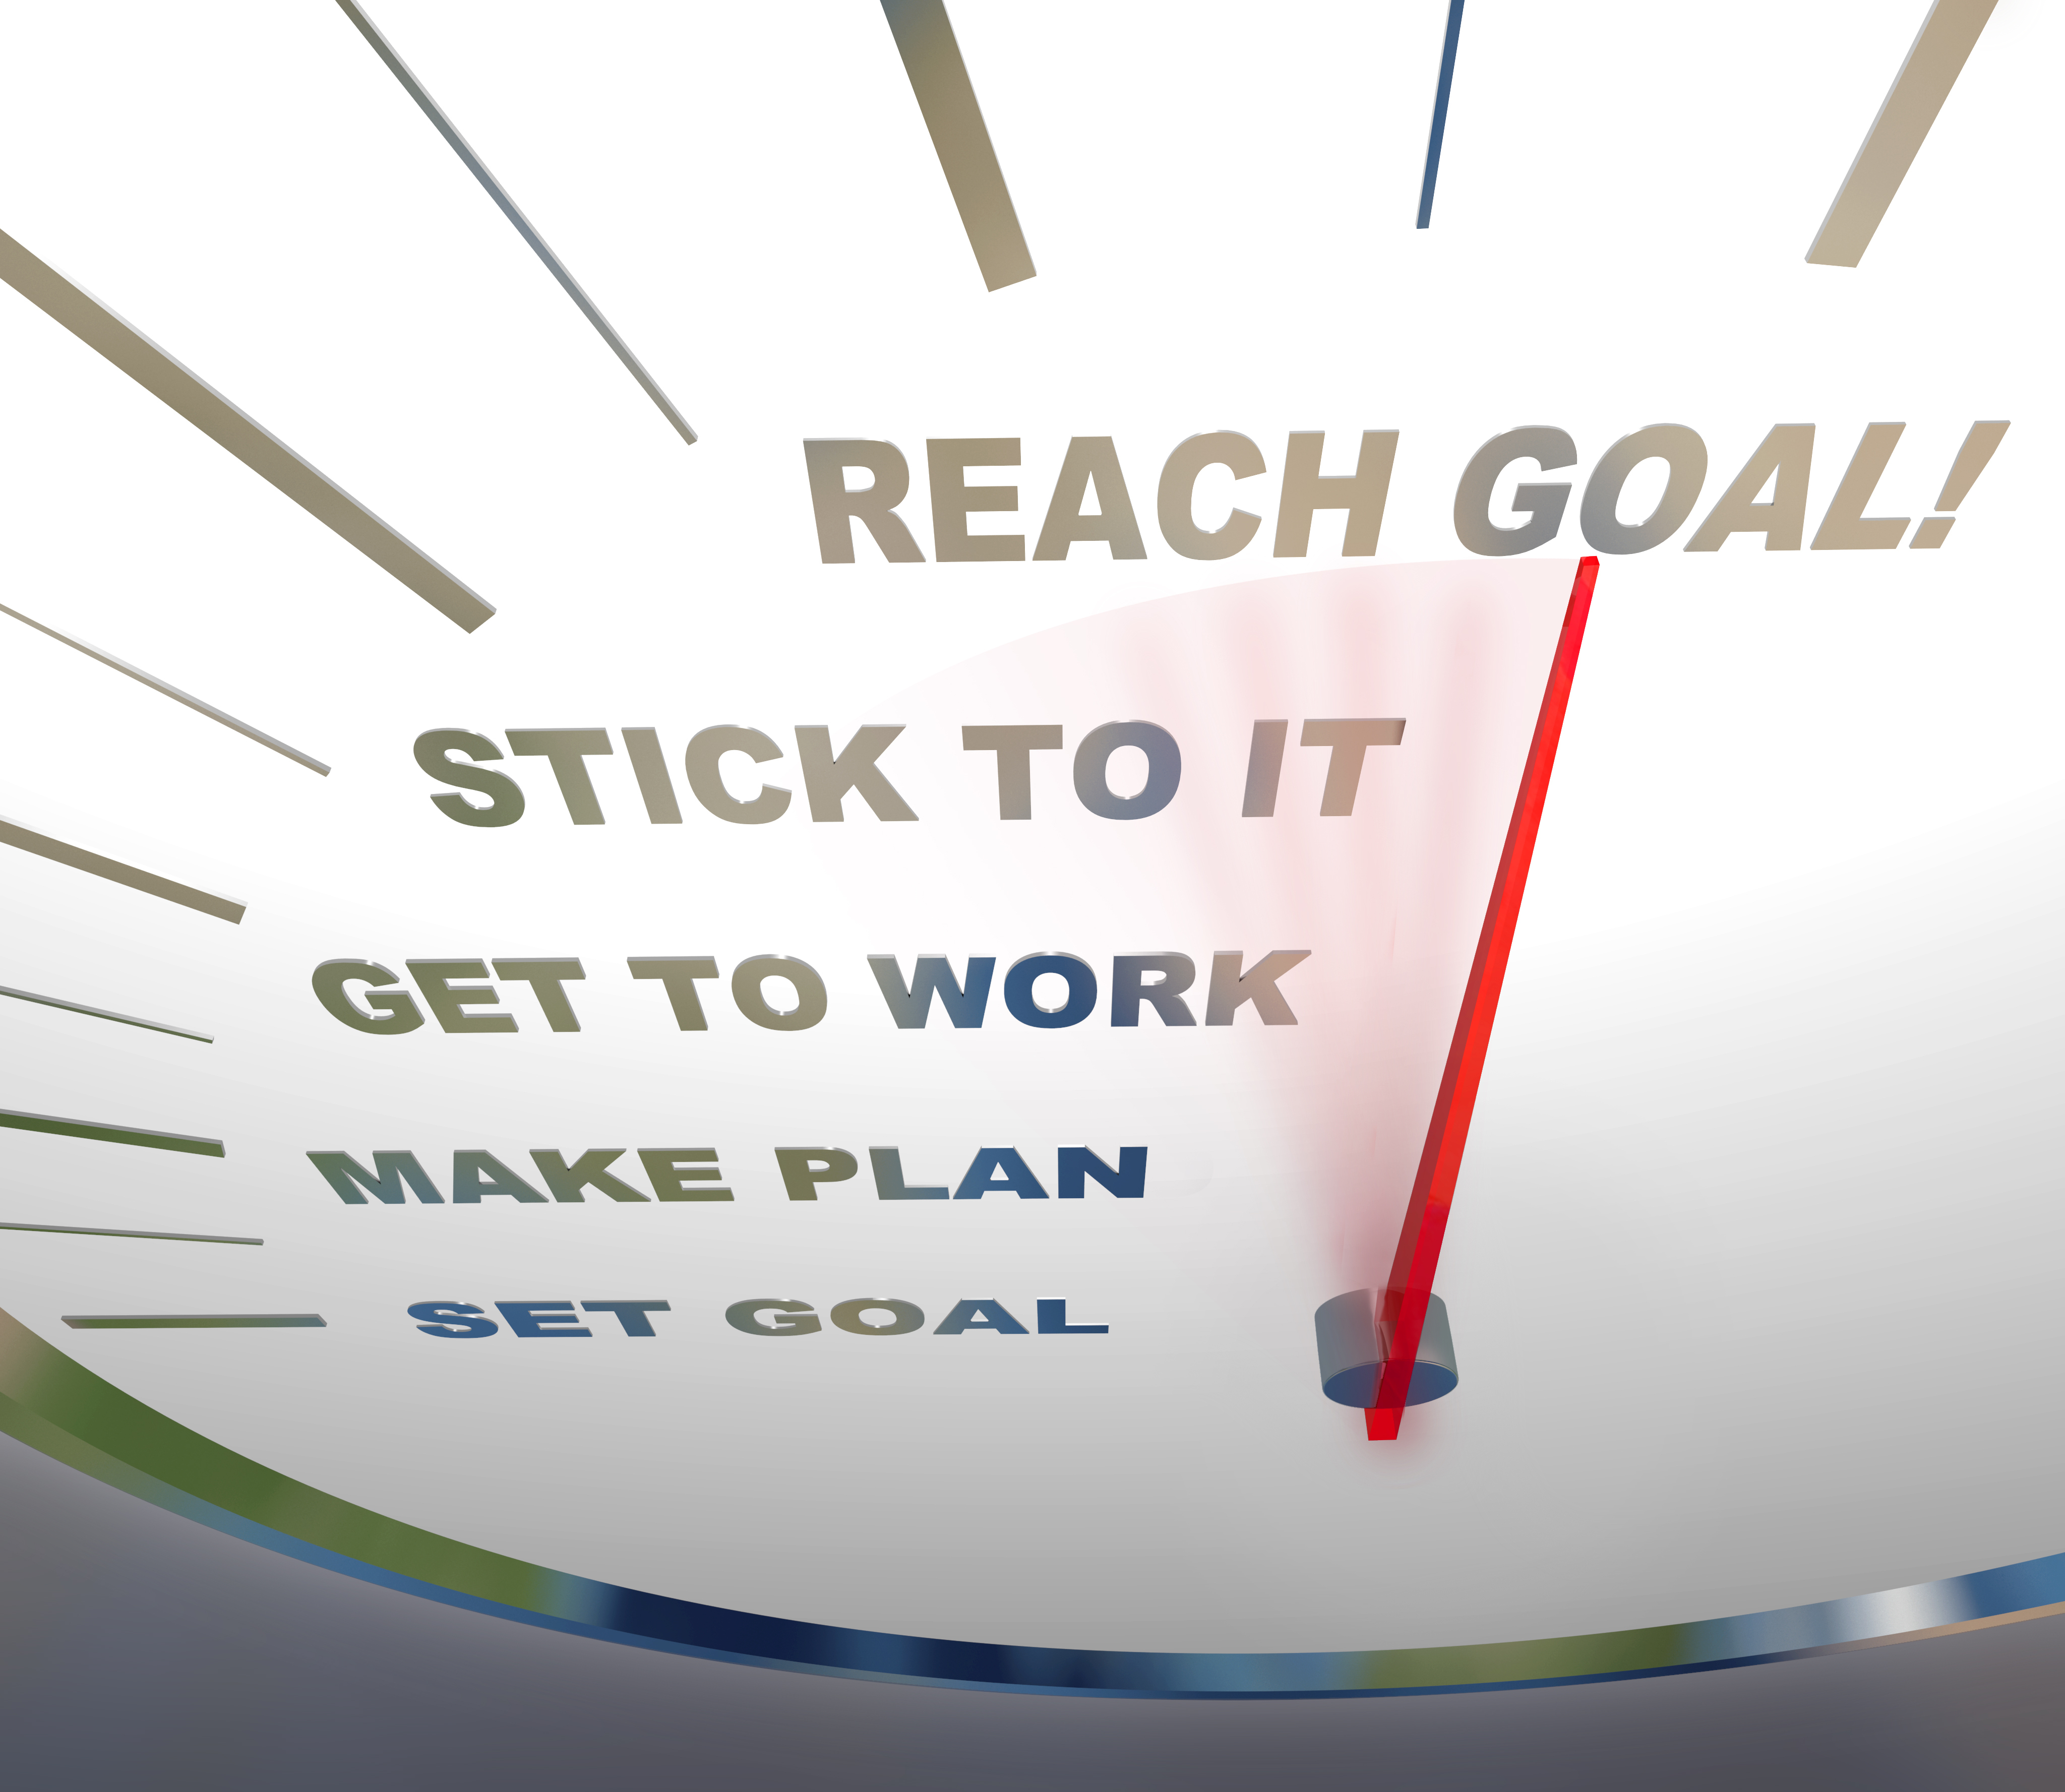 After setting goals, be vigilant in achieving them